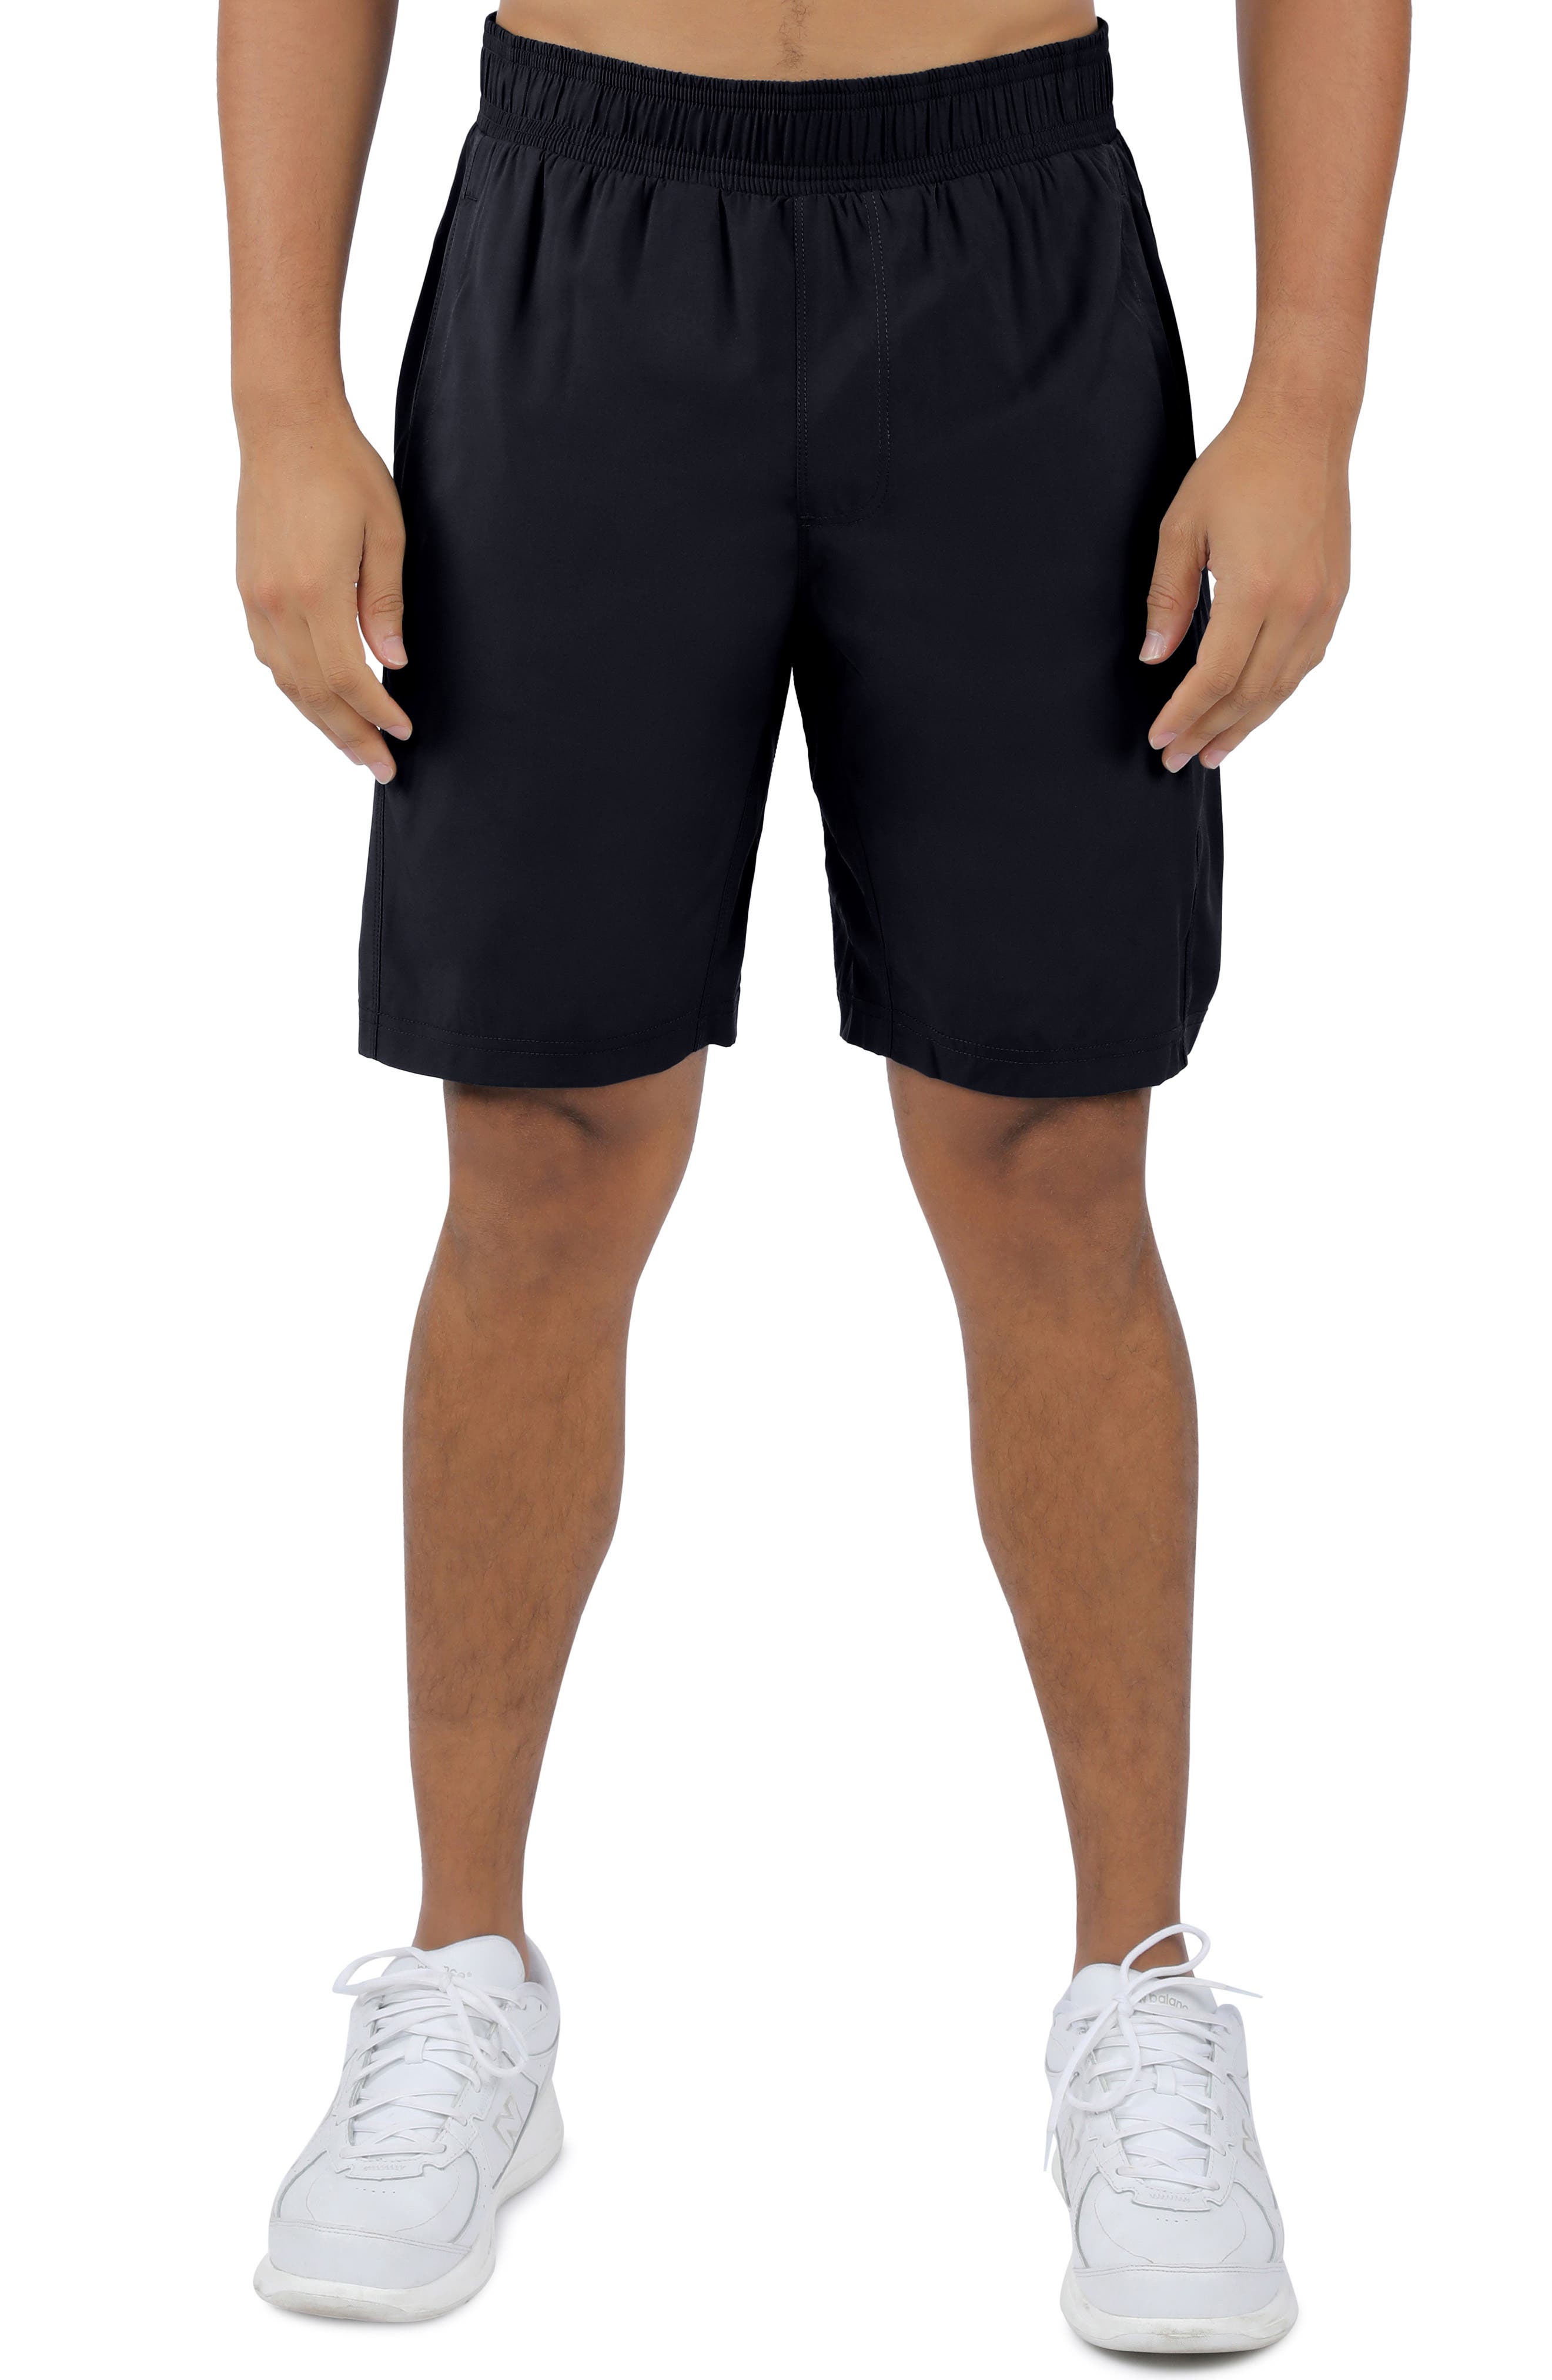 Polyester Stretch Woven Shorts 90 Degree By Reflex